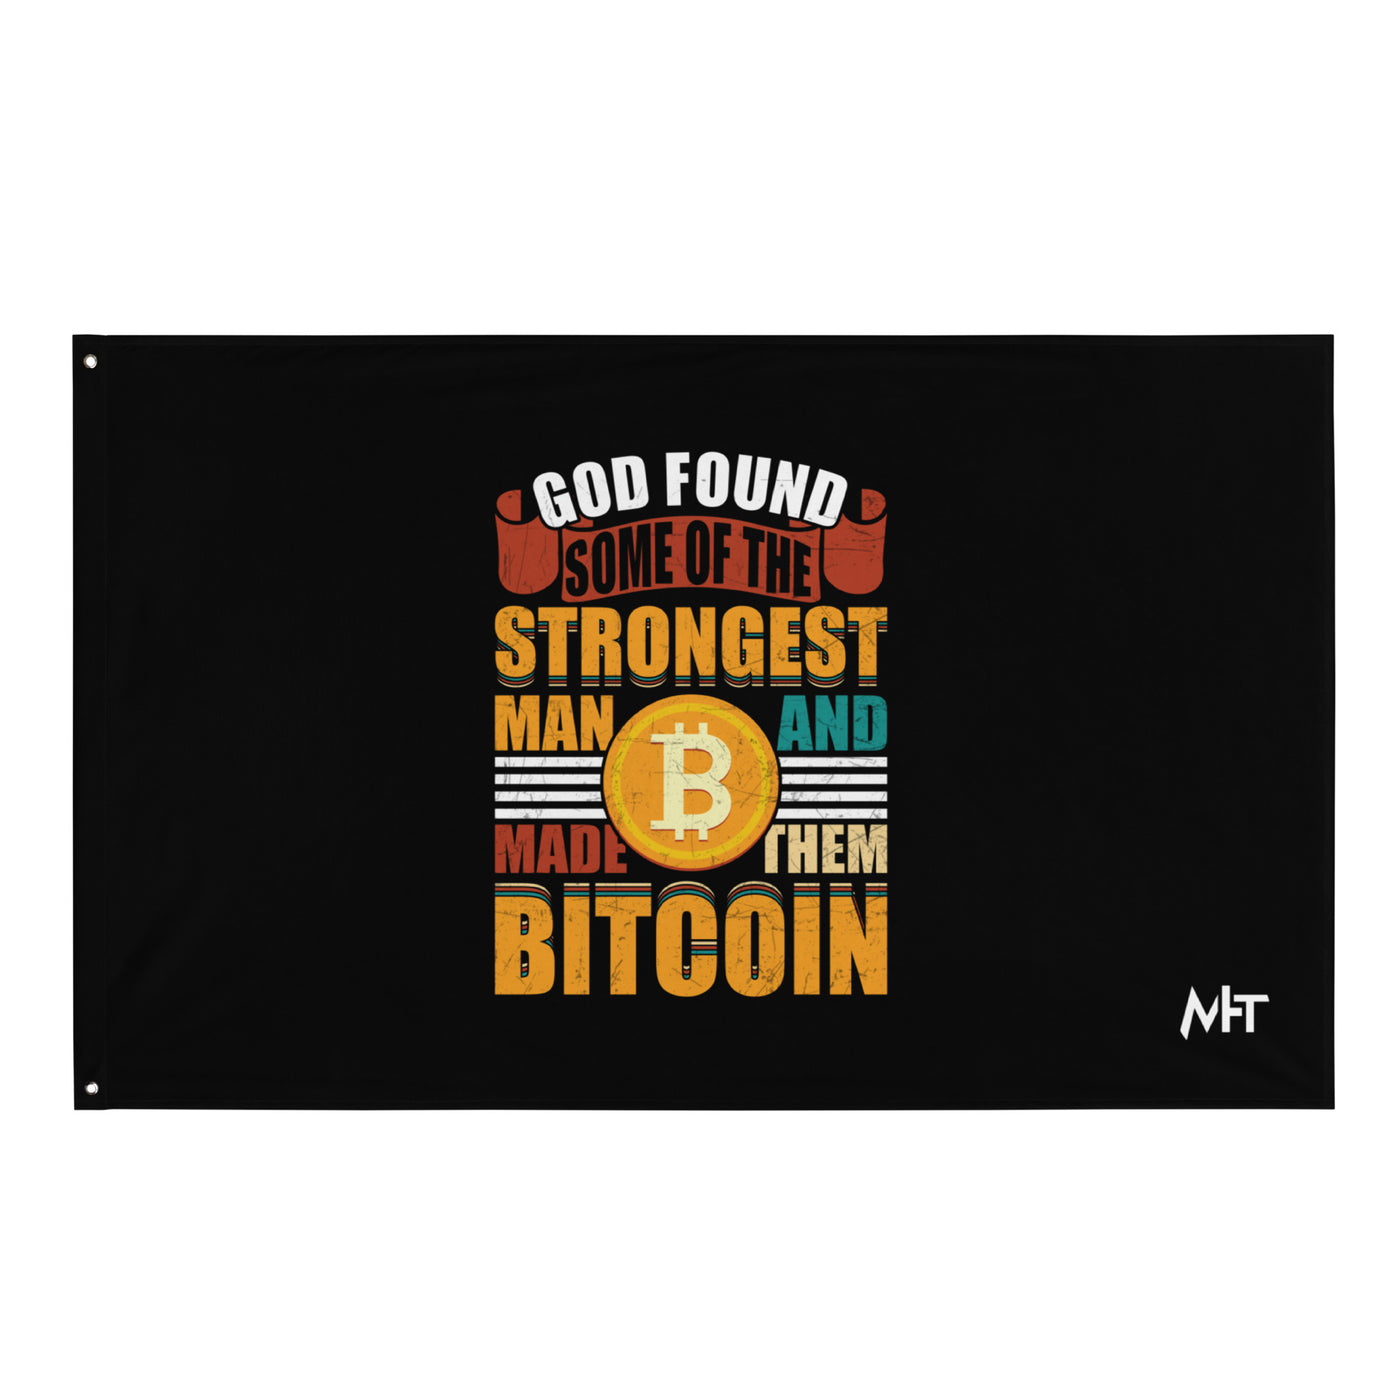 God Found Some of the Strongest Man and Made them Bitcoin - Flag